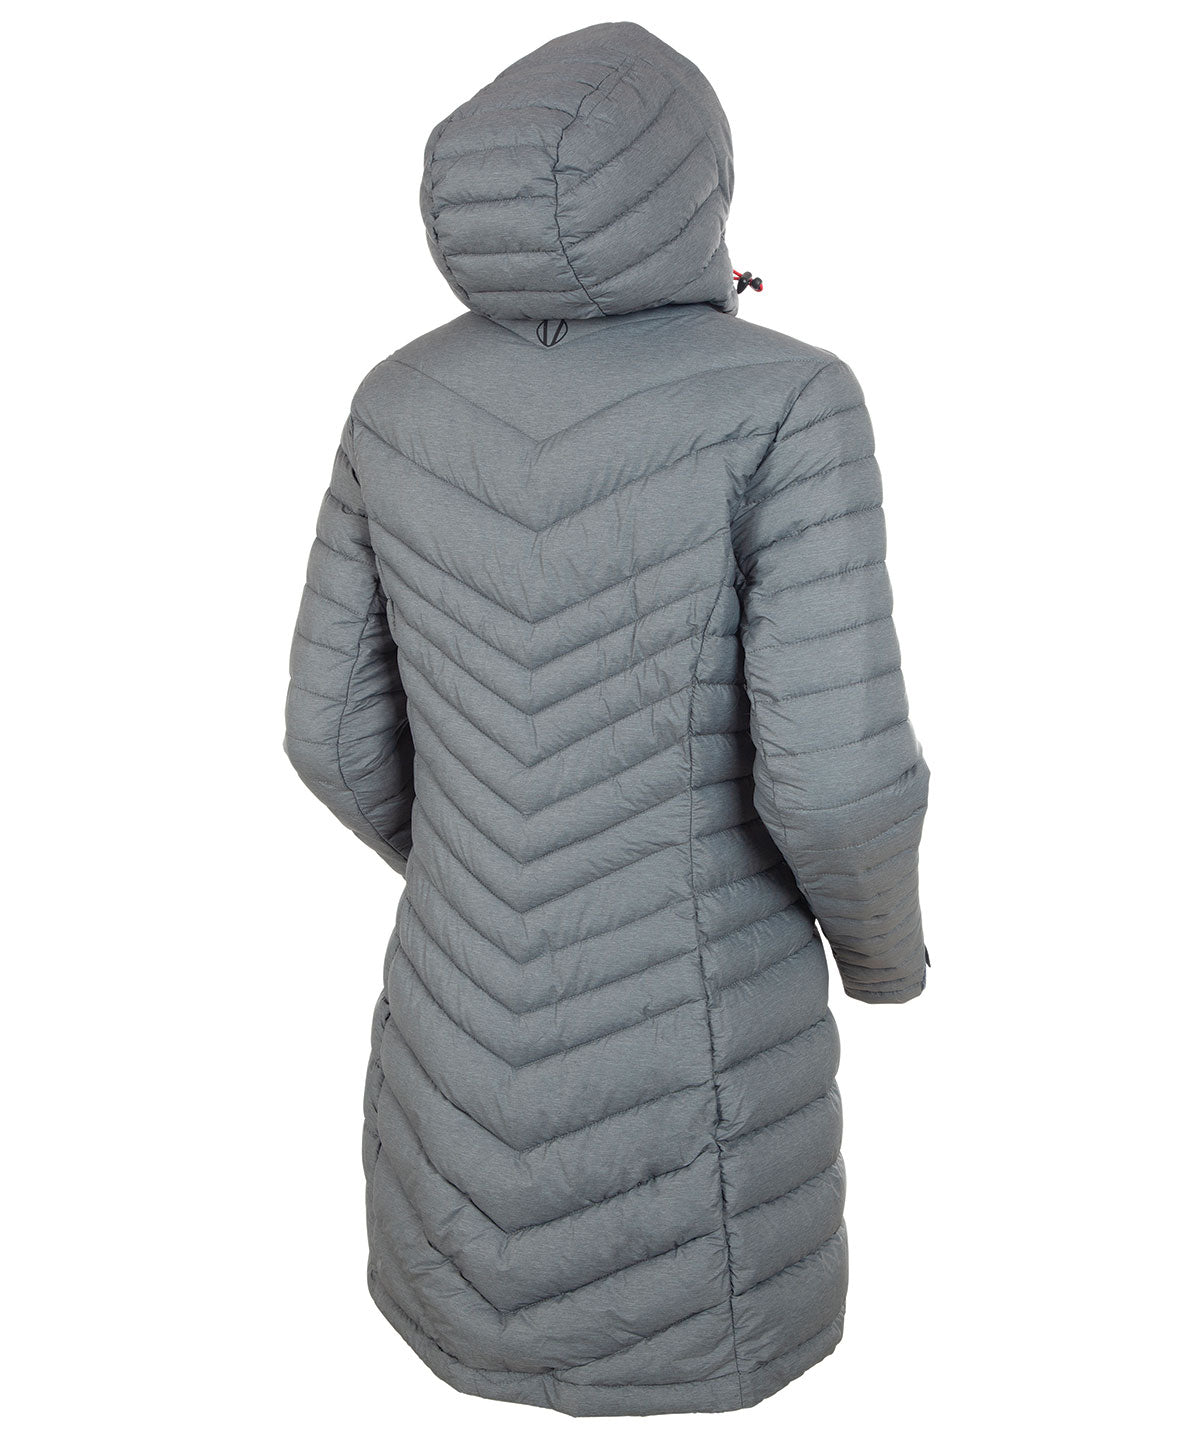 Women's Jojo Thermal Quilted Long Jacket with Hood - Sunice Sports